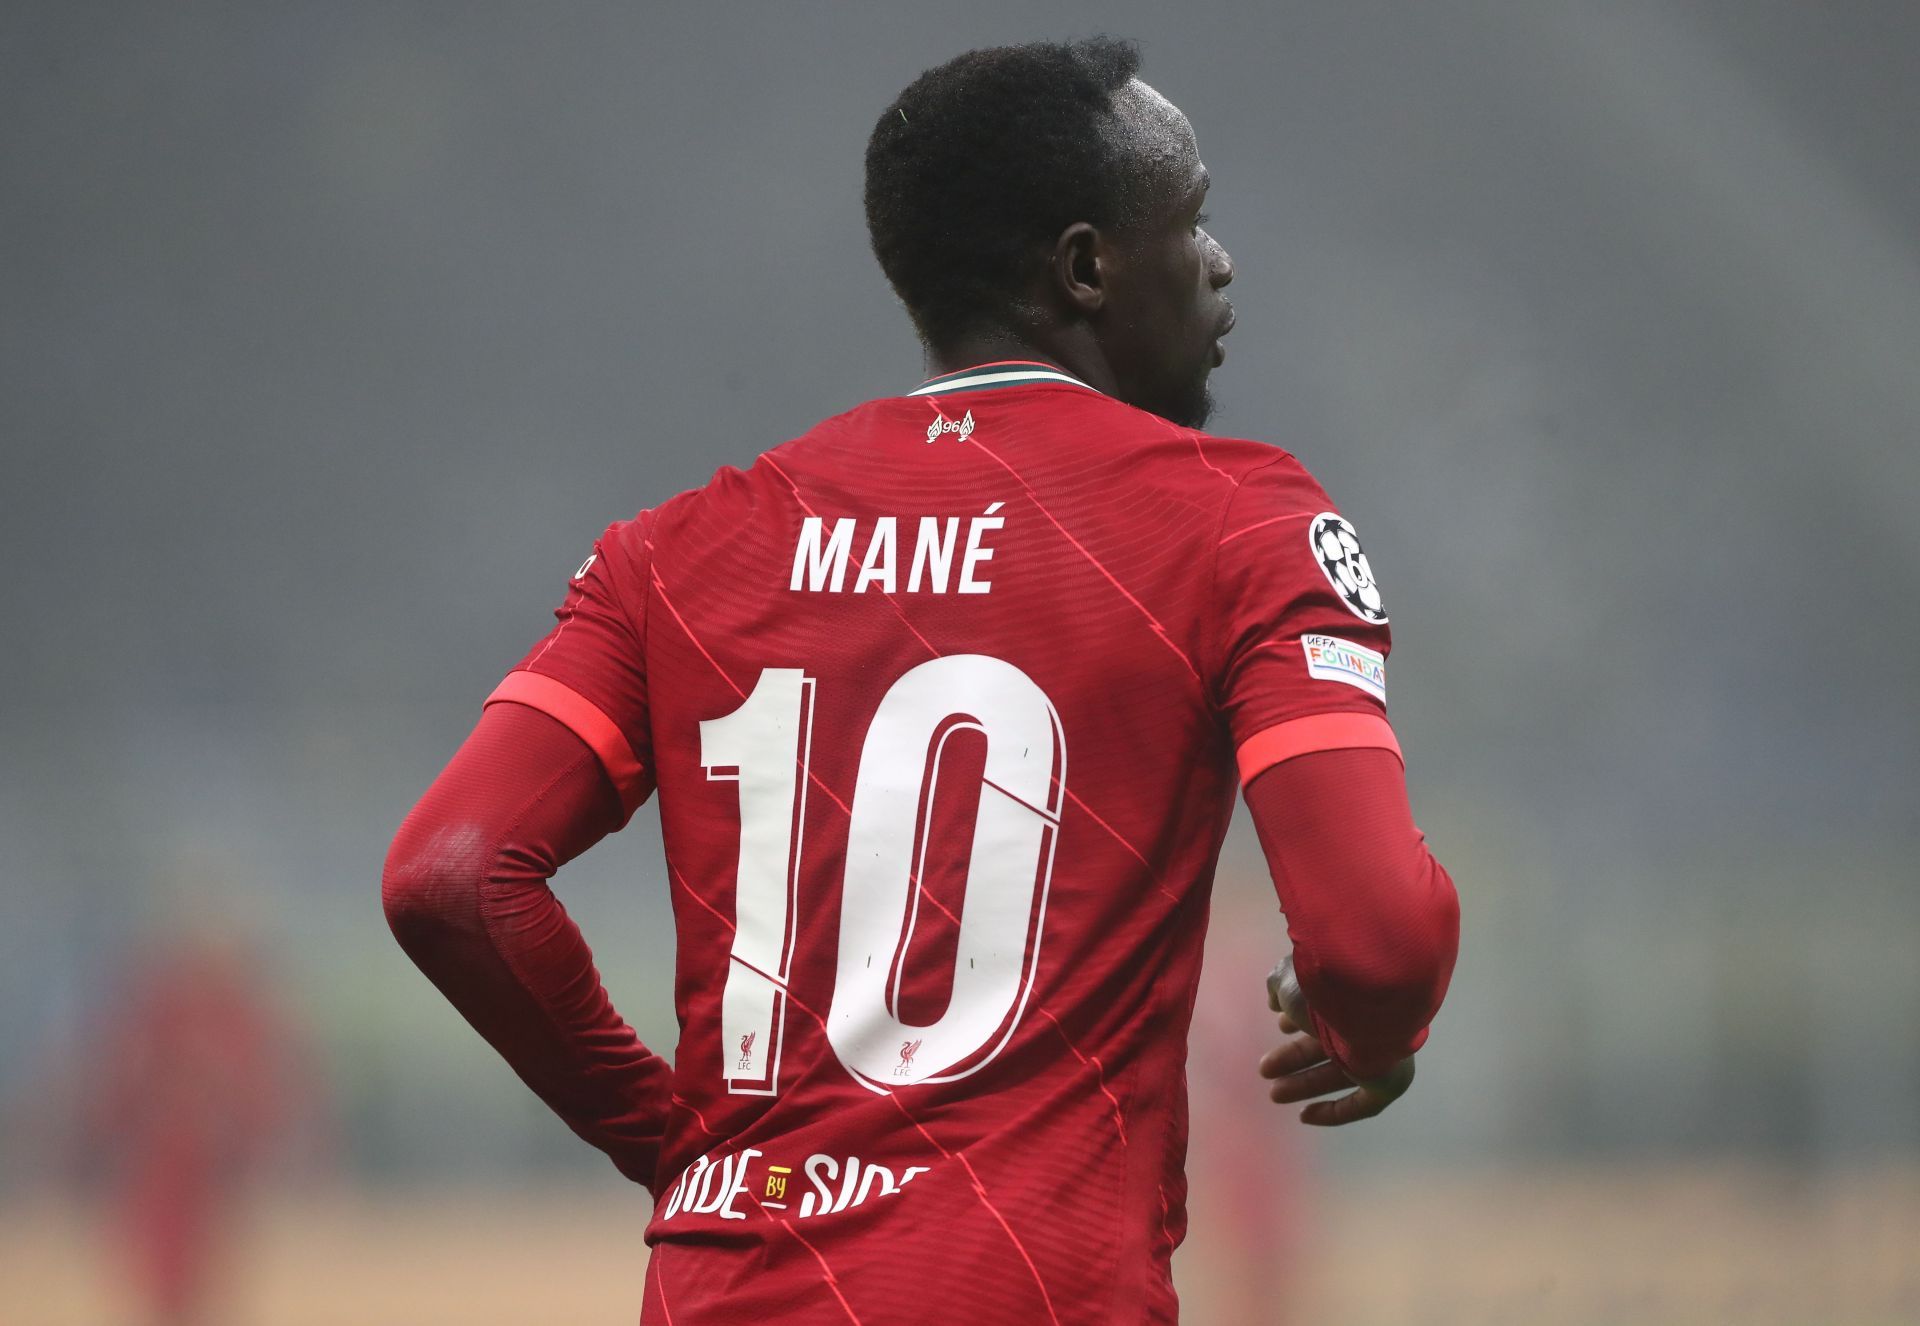 Mane netted the second goal against Benfica as he looks set to impress the Liverpool boss